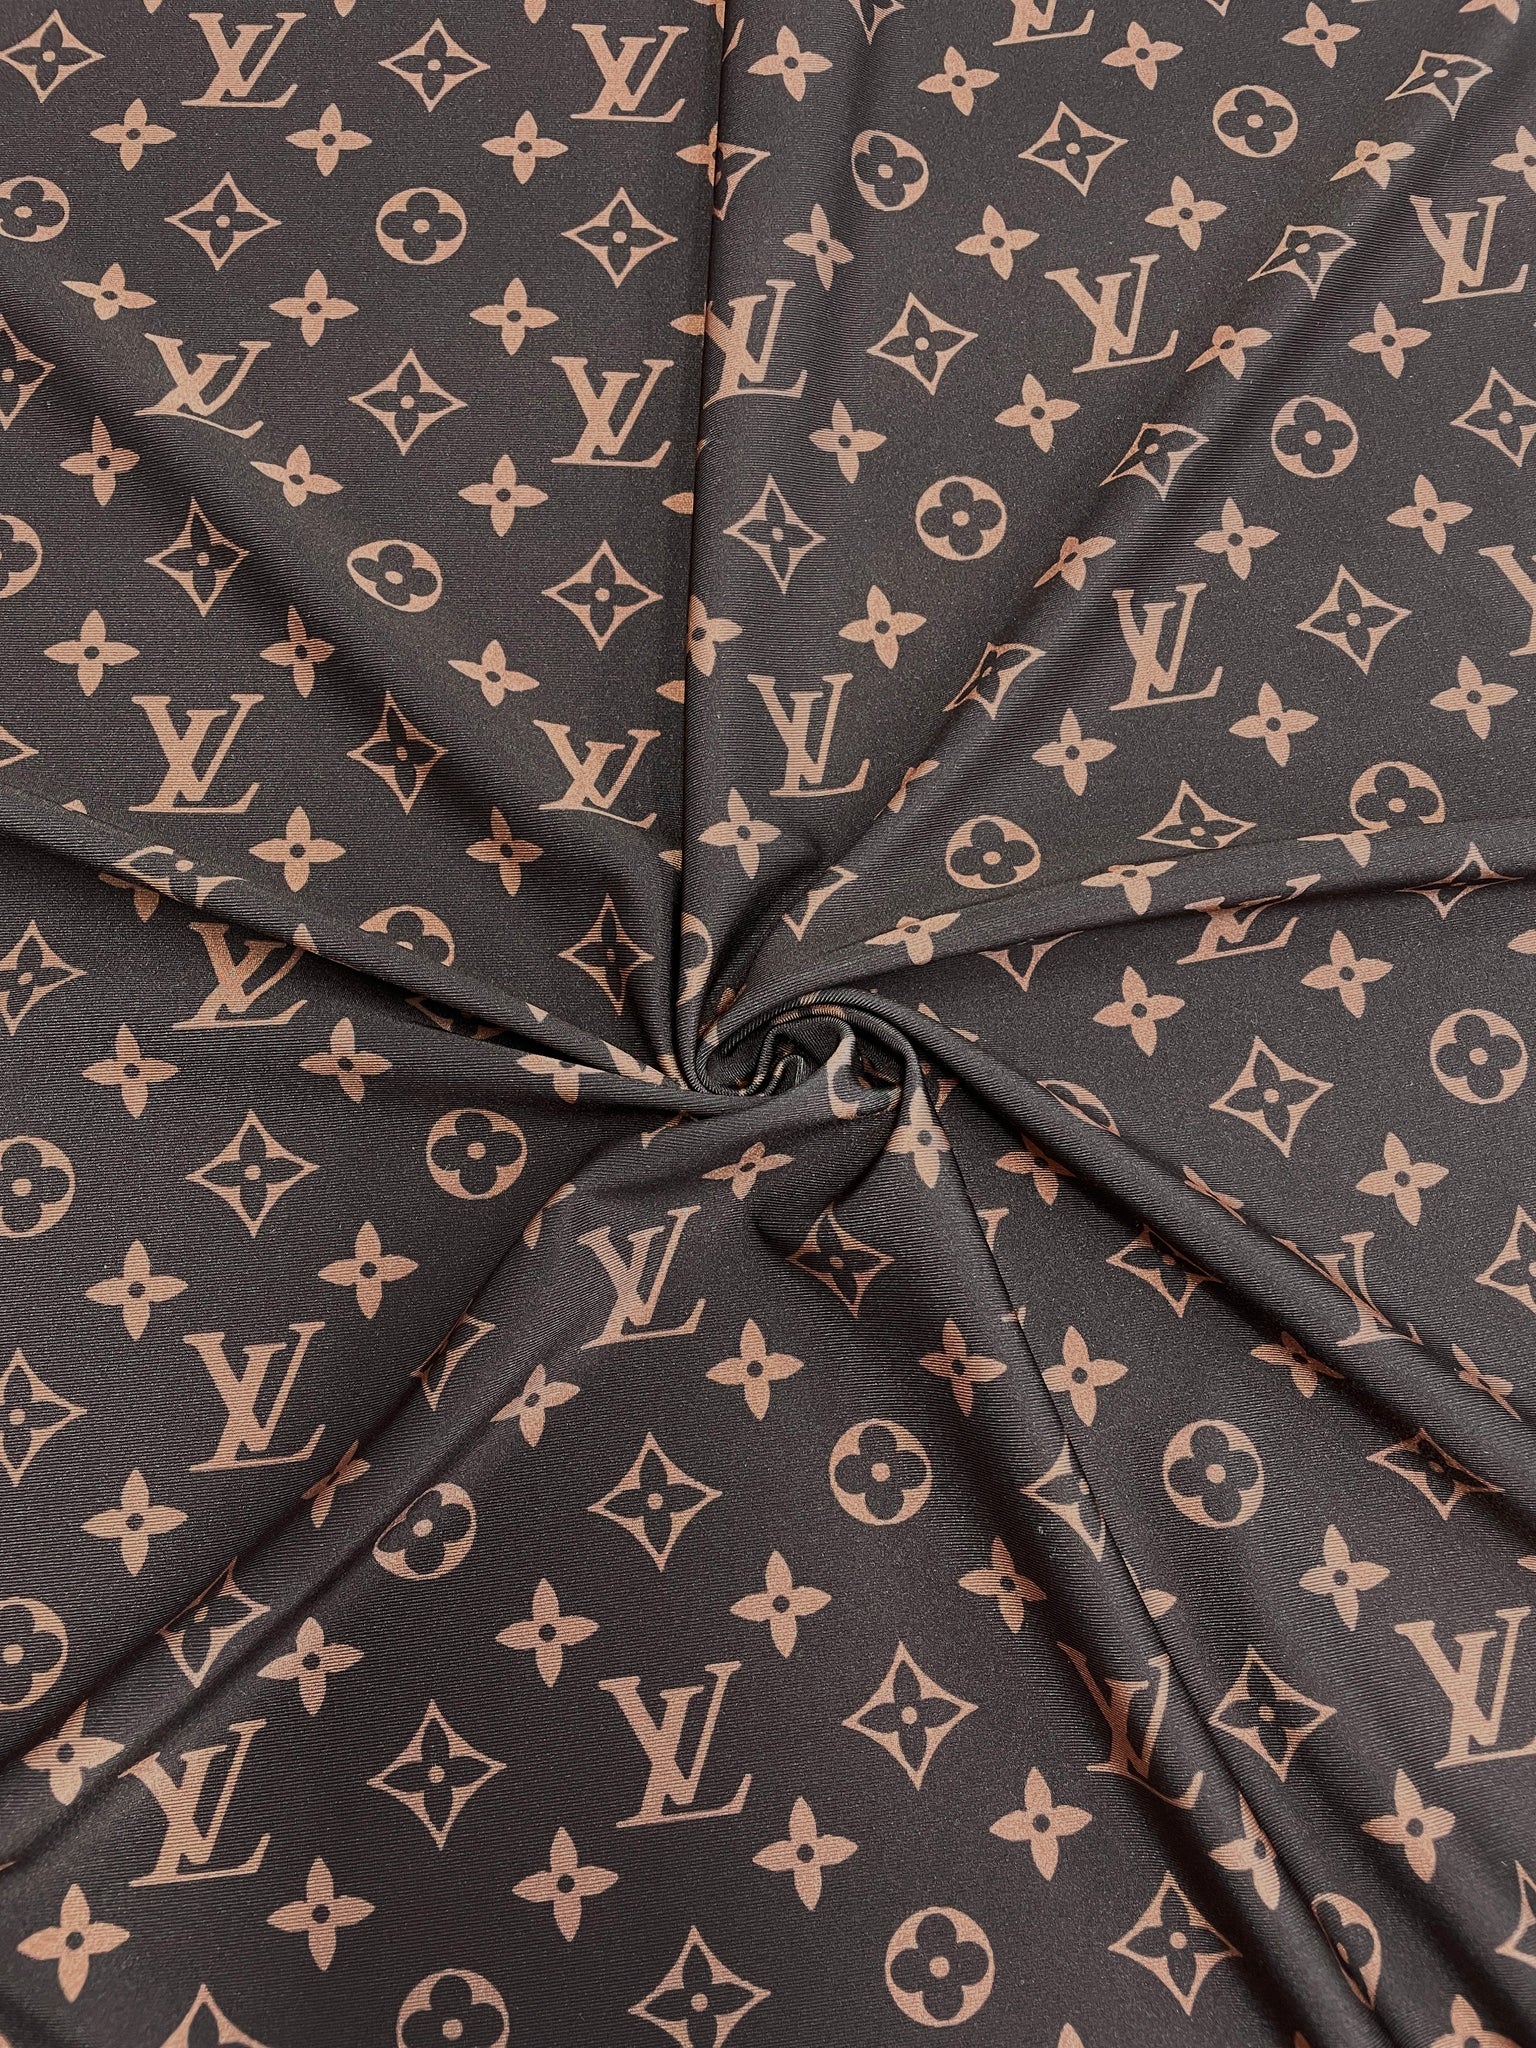 Where To Find Louis Vuitton Fabric